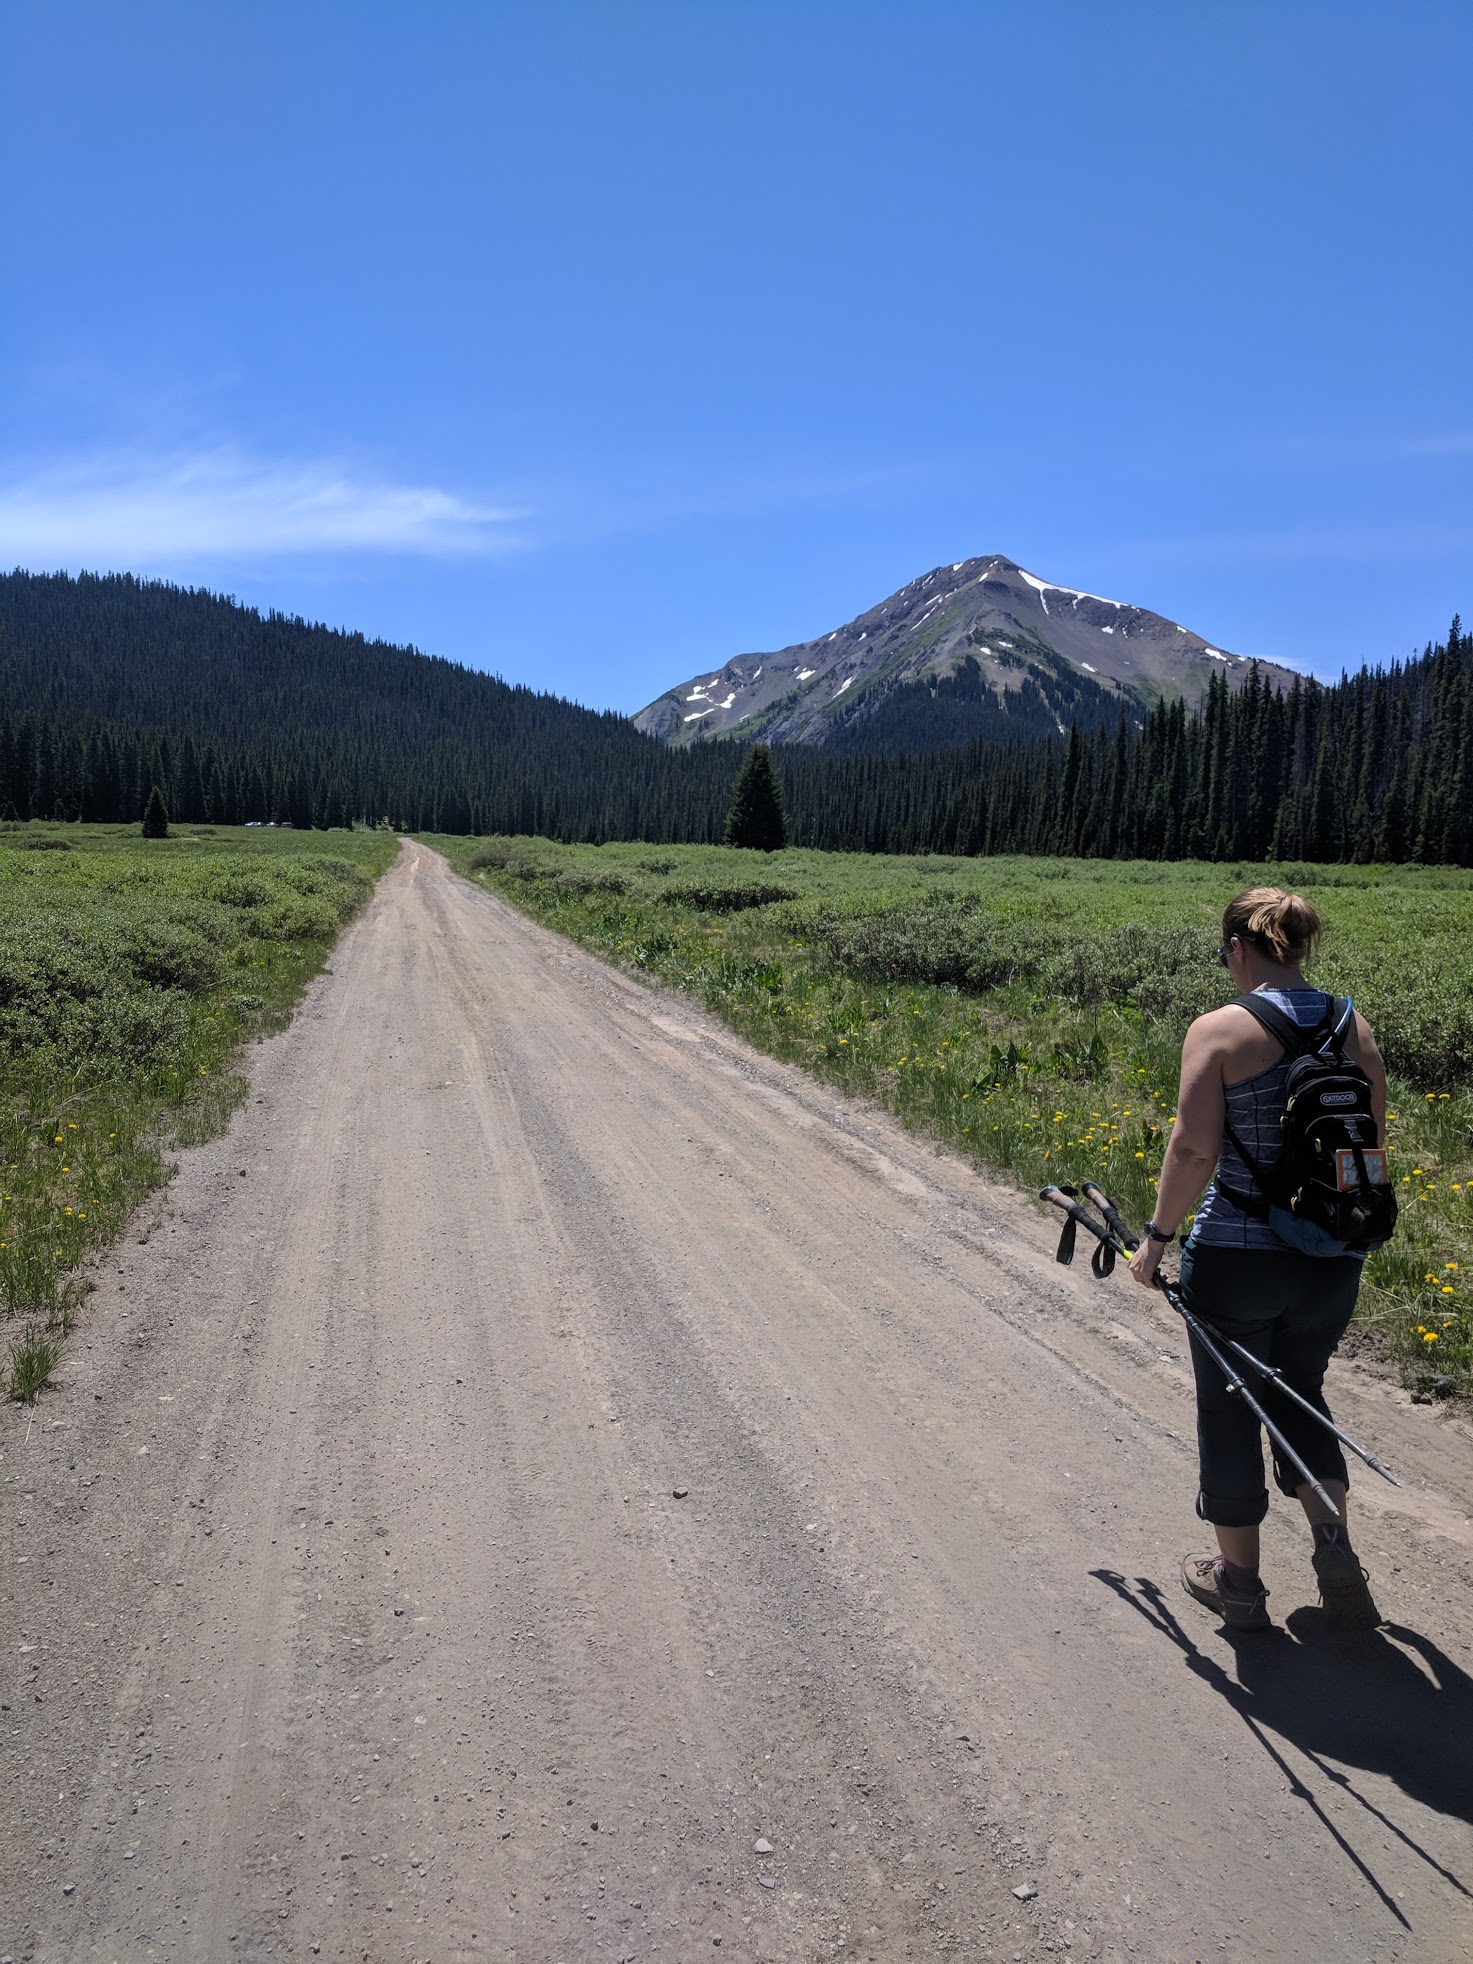 Making our way back across the meadow towards Crested Butte.